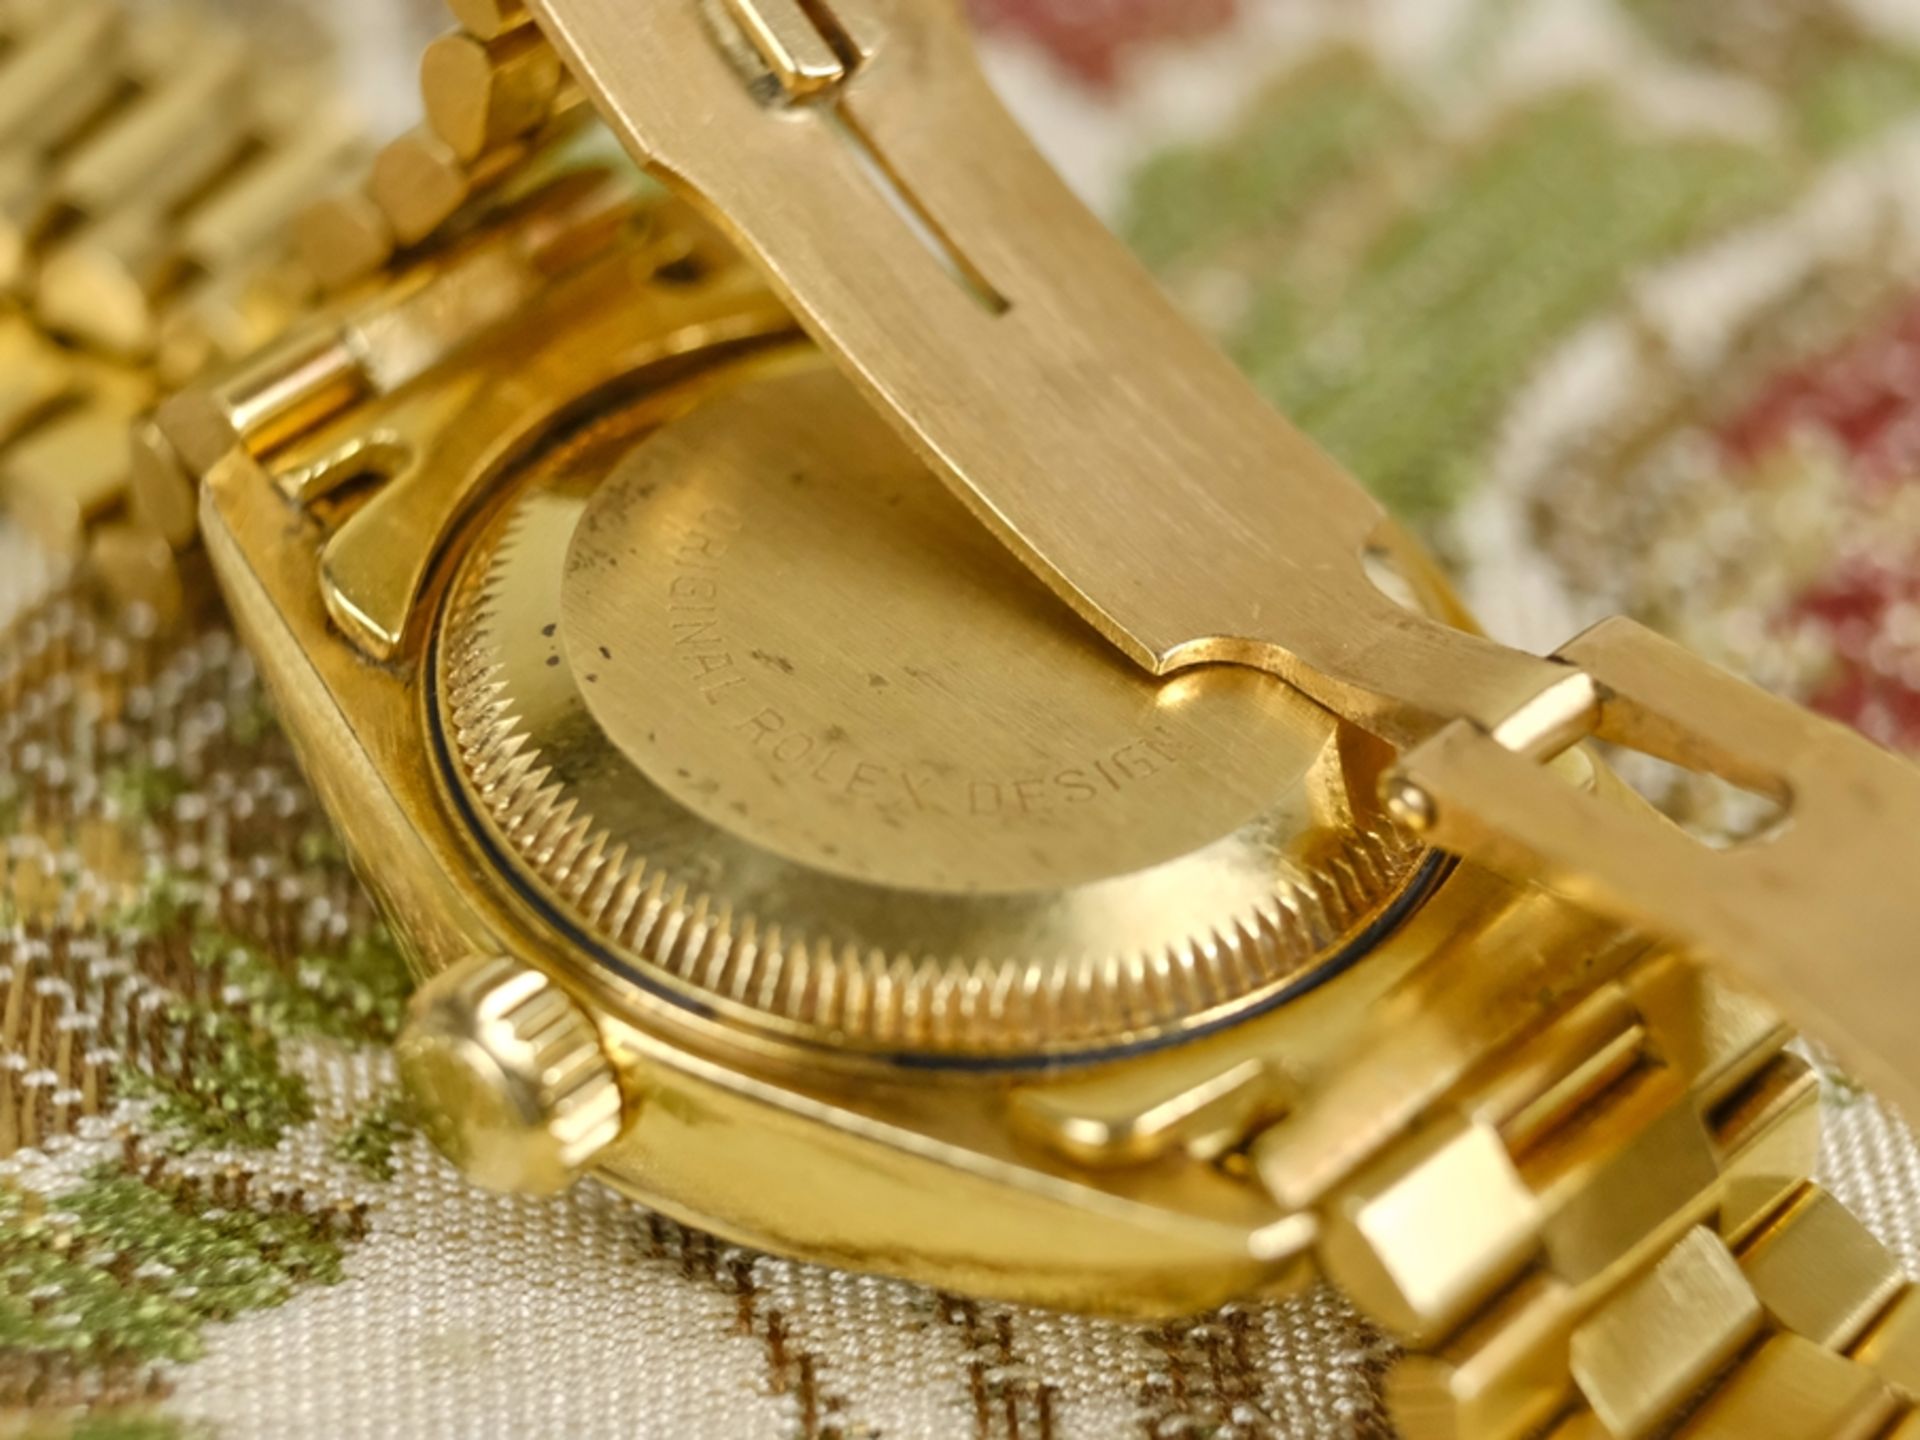 ROLEX LADIES' WATCH "Oyster Perpetual DATEJUST", classic timeless ROLEX model, gold-coloured dial w - Image 3 of 7